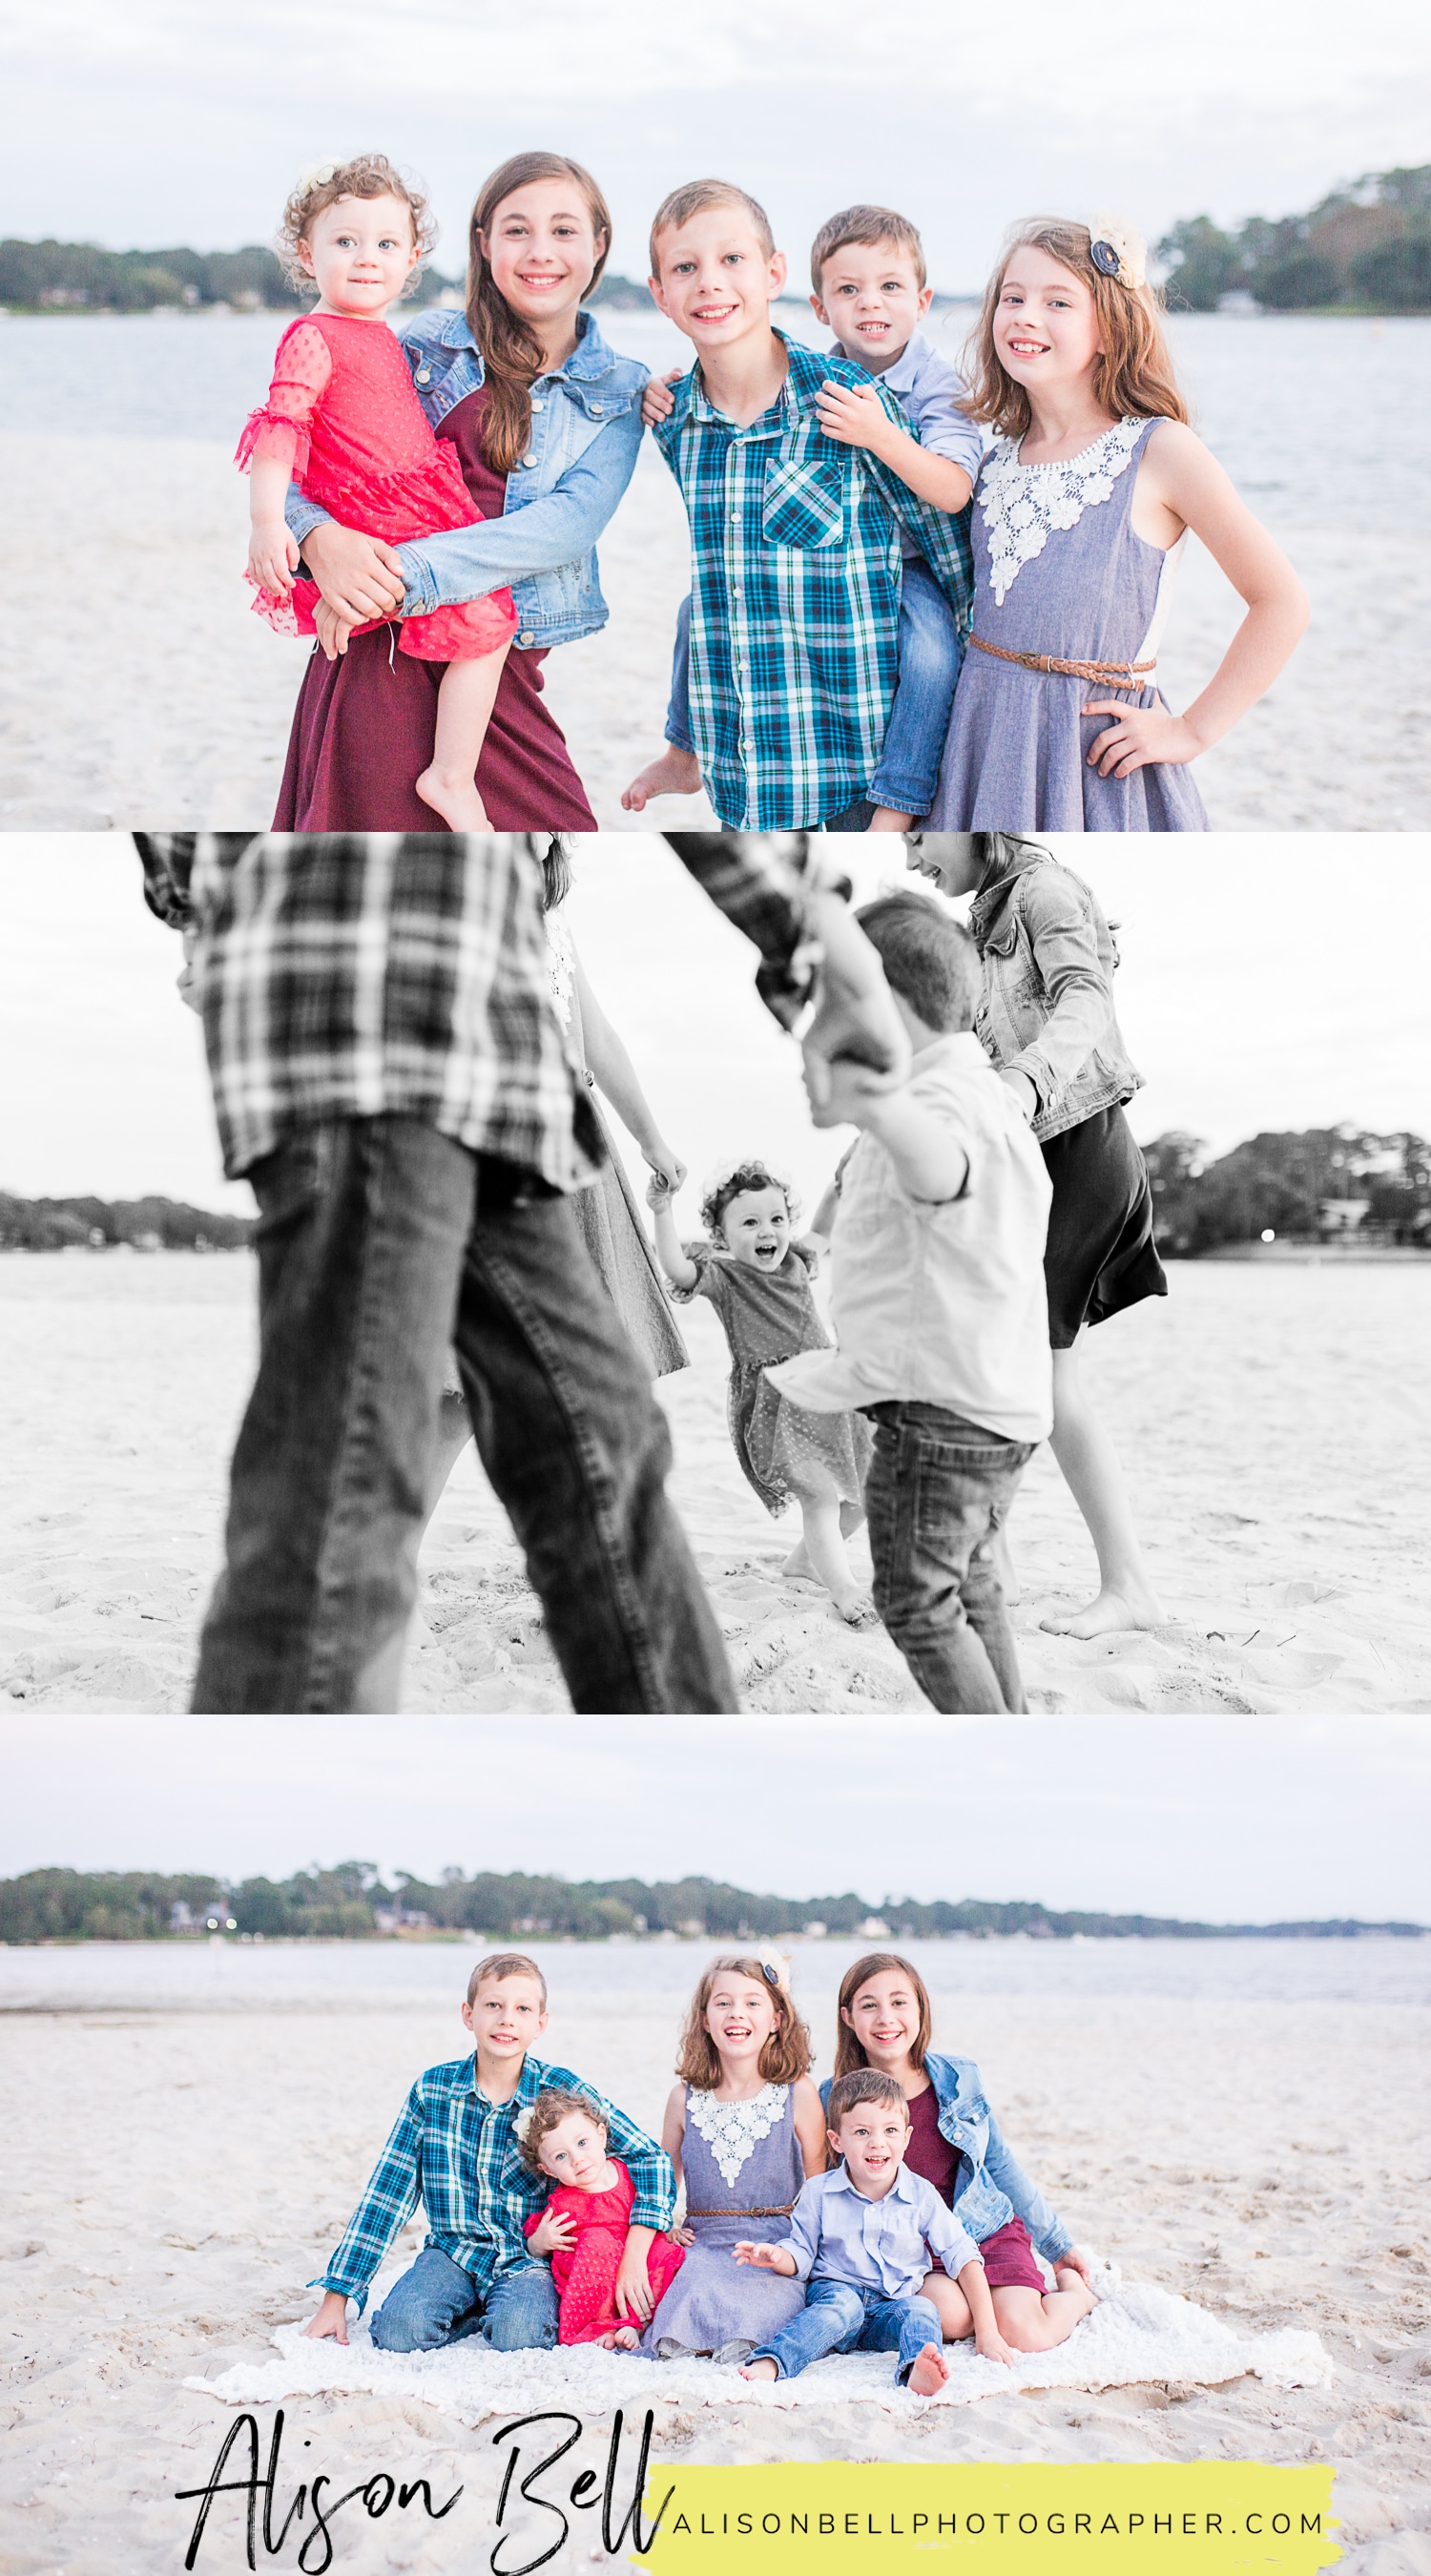 the-narrows-family-photos in Virginia Beach by Alison Bell, Photographer